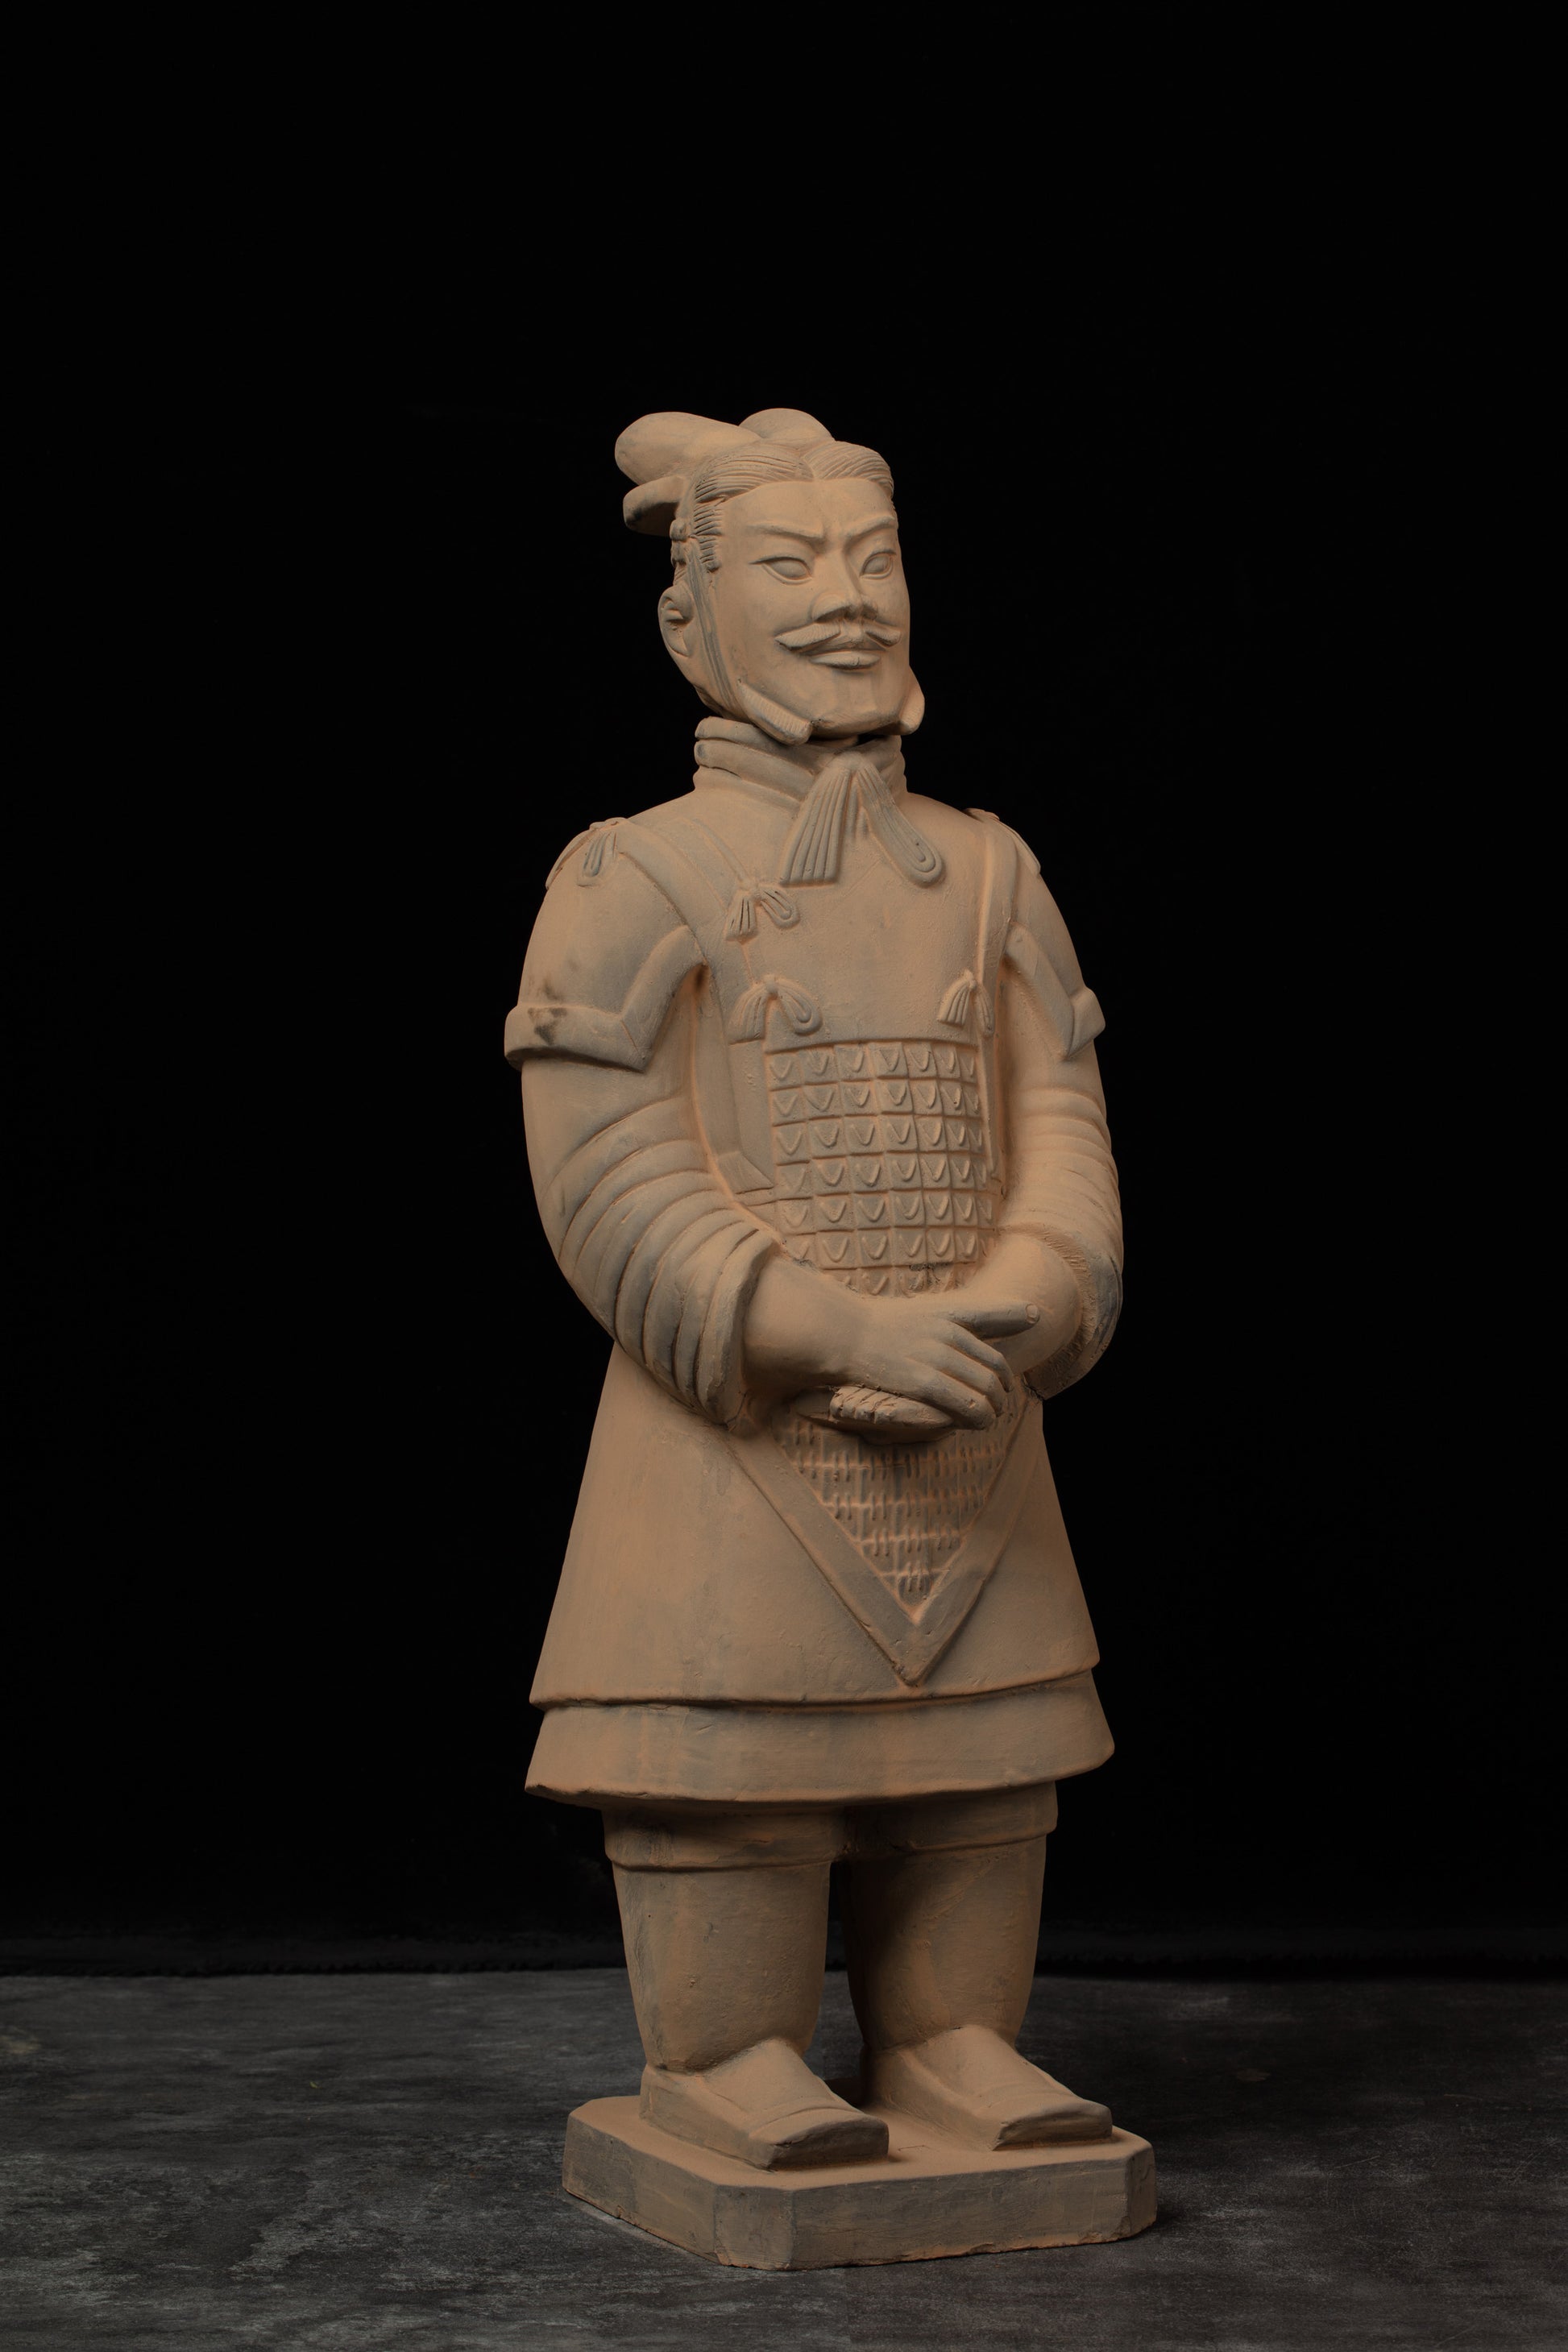 70CM General - CLAYARMY-Culturally Inspired: Side view of the 70CM General, illustrating cultural inspiration in the sculpting of ancient military uniforms and accessories.